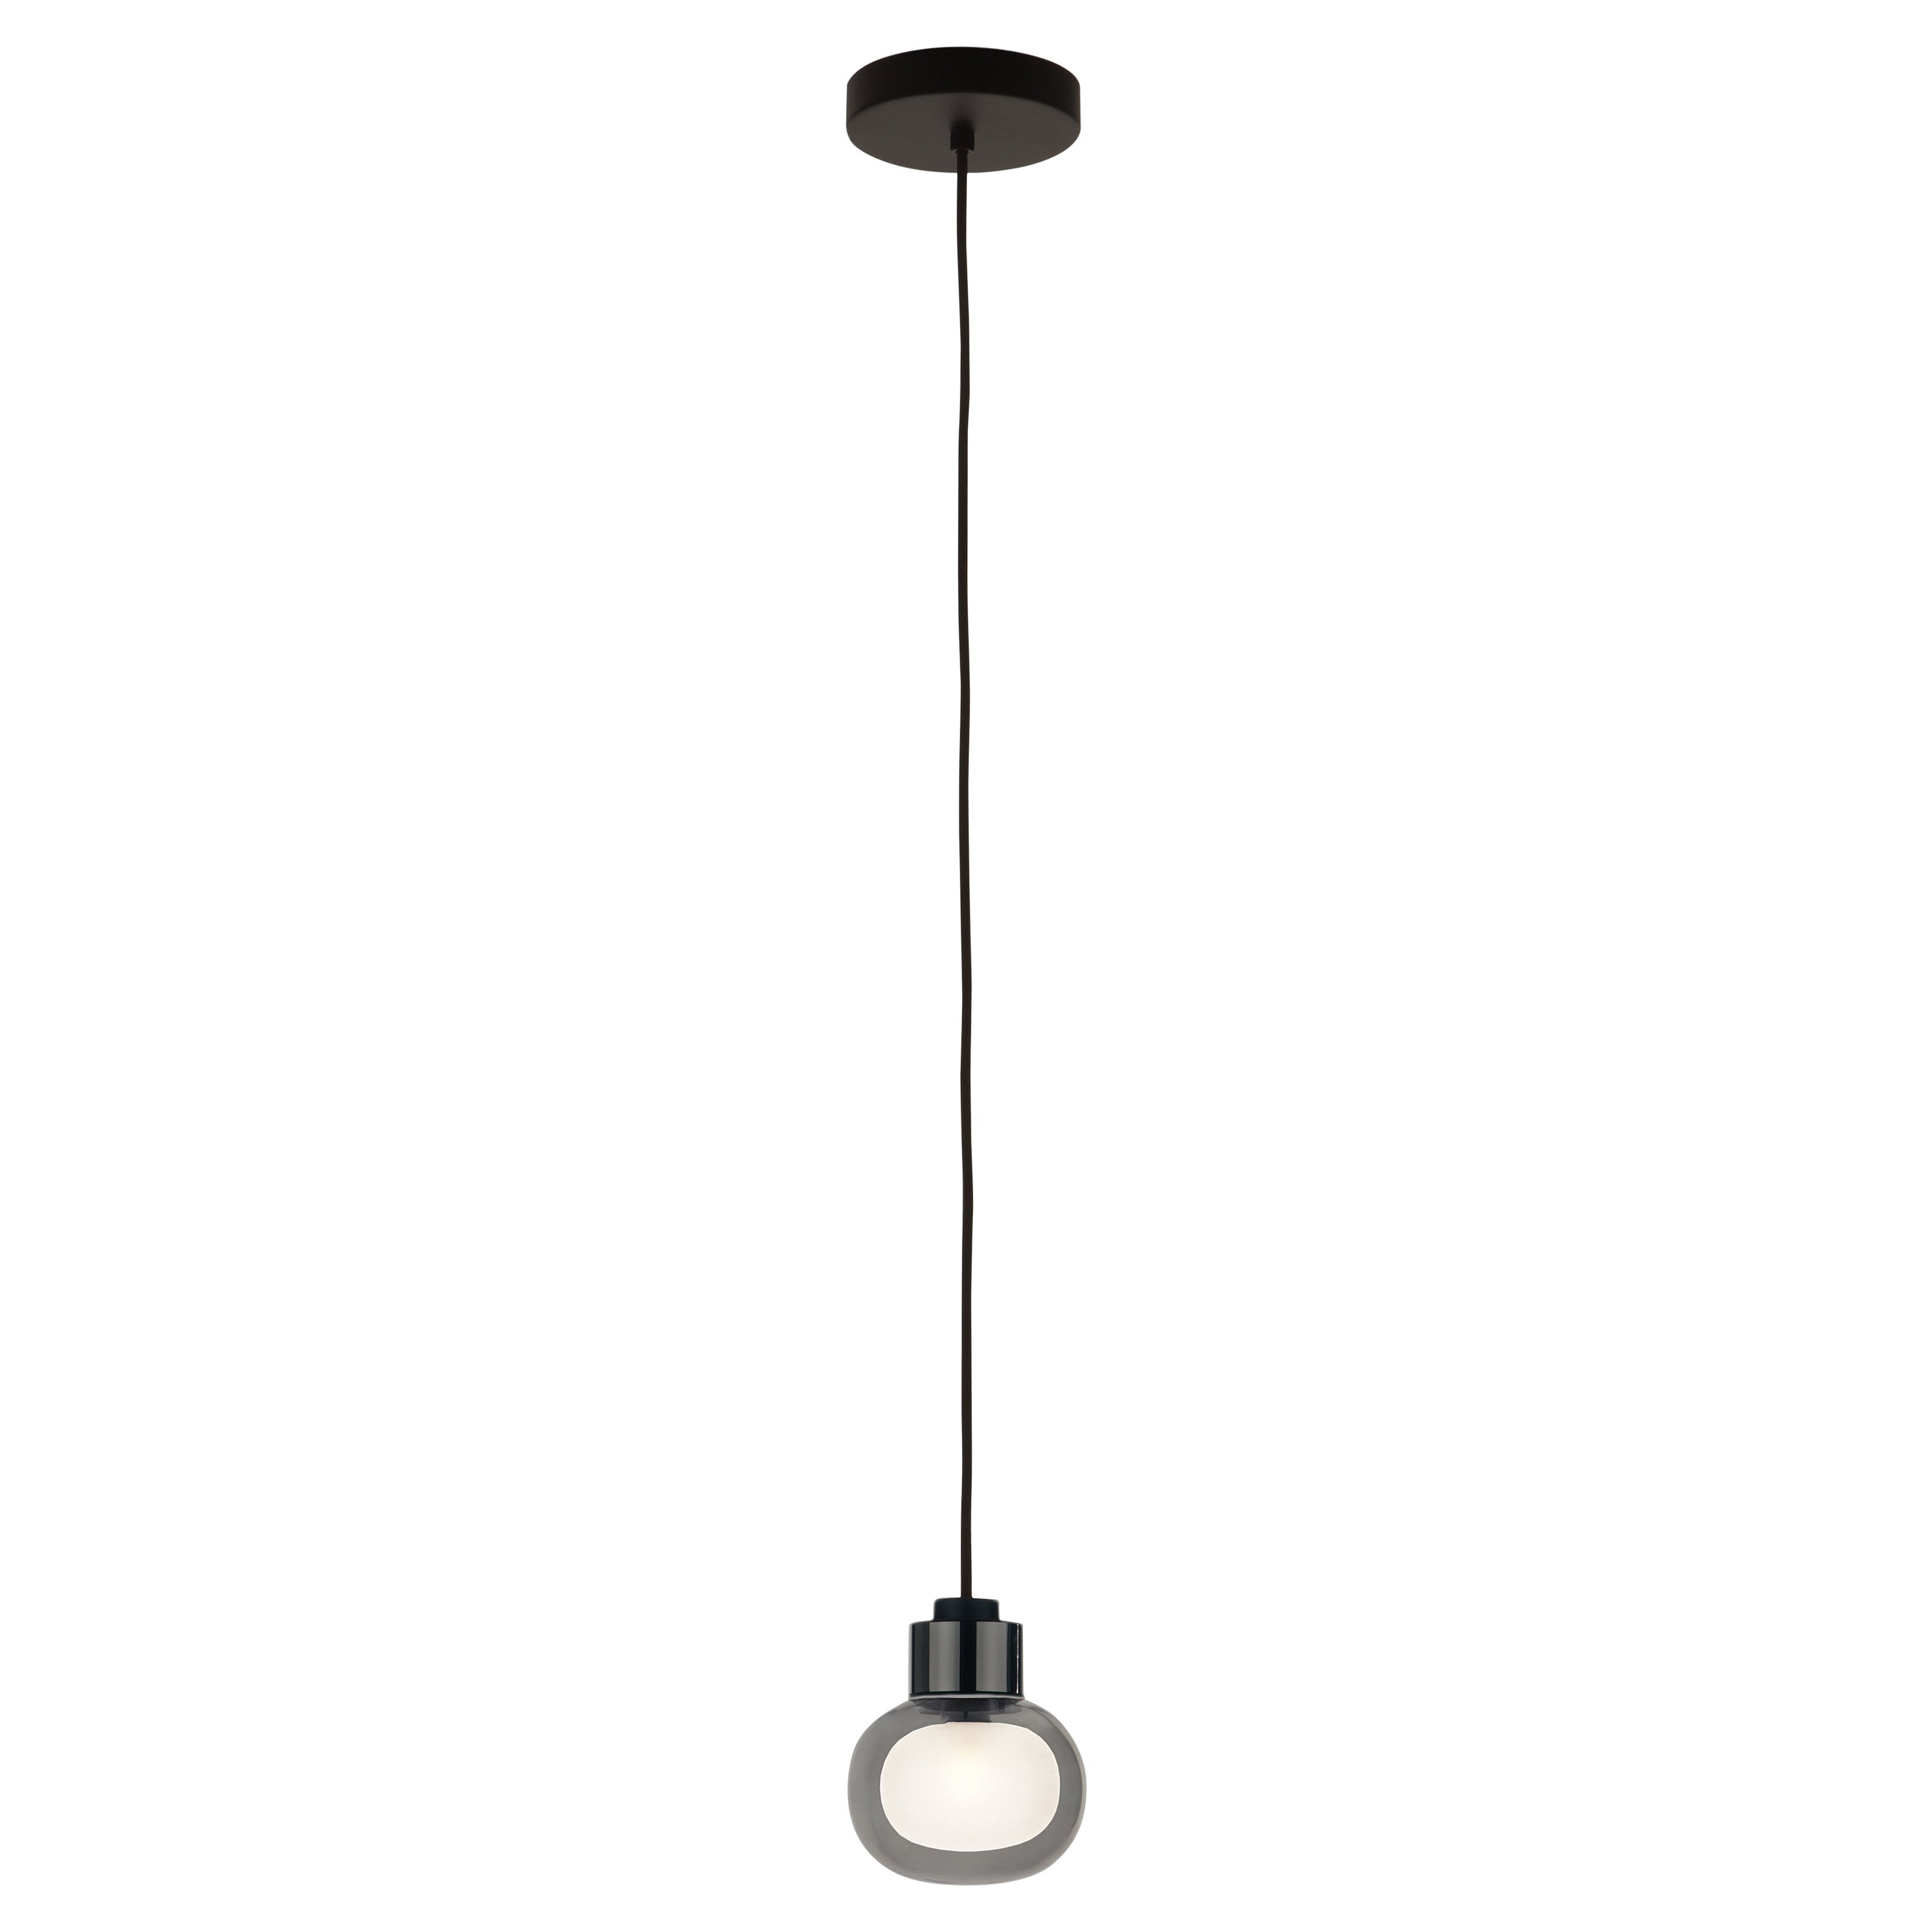 Contemporary Pendant Lamp 'Nabila 552.21' by Tooy, Black Chrome, Smoked Glass For Sale